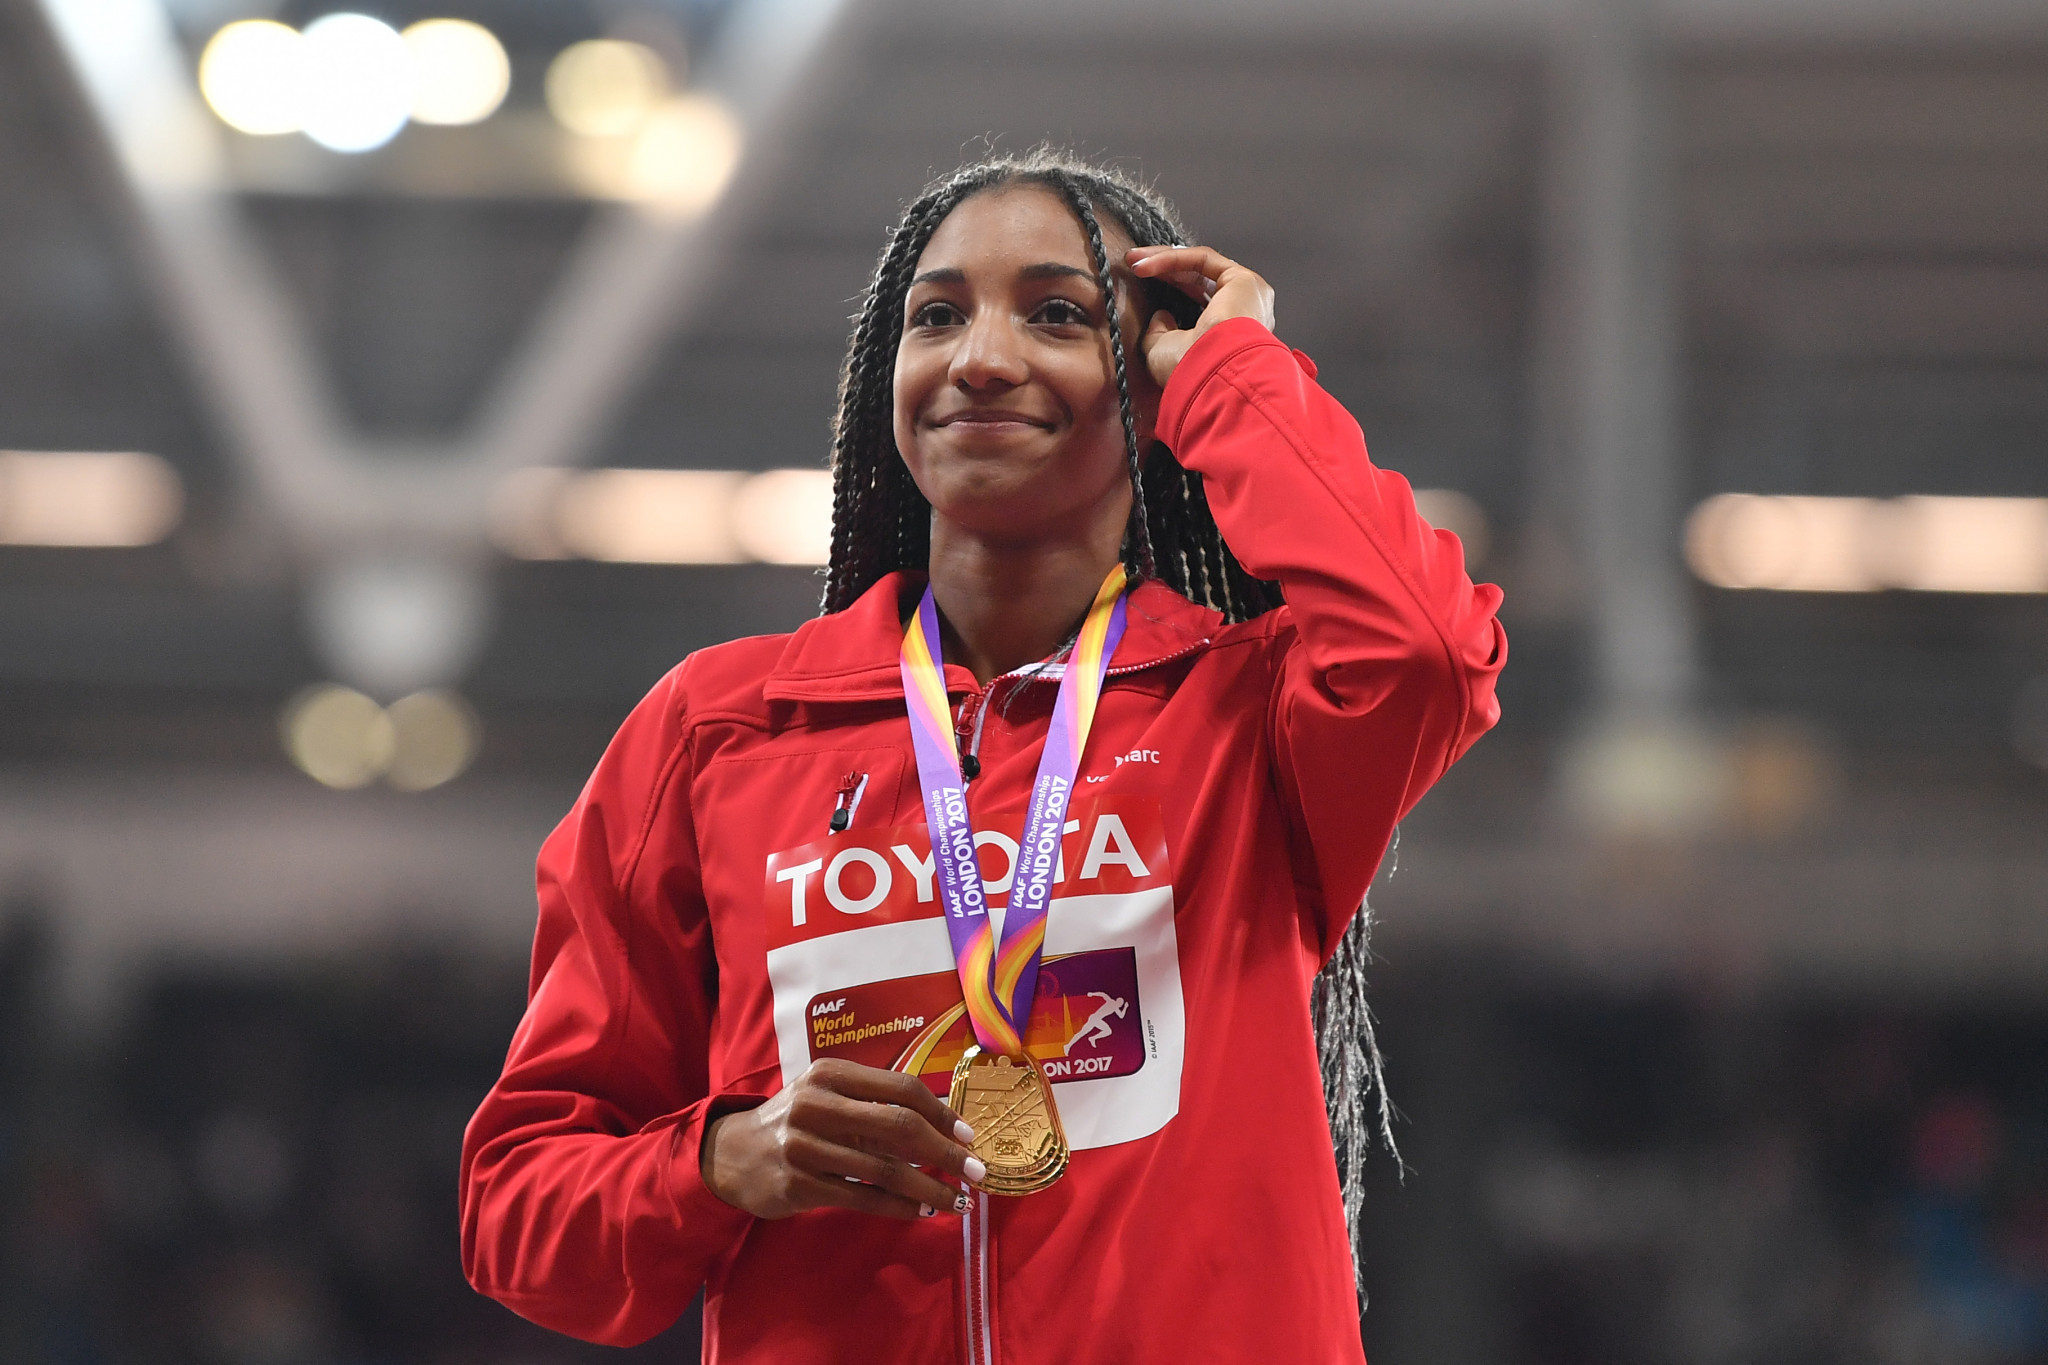 Nafissatou Thiam, the first Belgian to win a gold medal in a World Athletics Championship, is among the nominees for Female World Athlete of the Year ©Getty Images